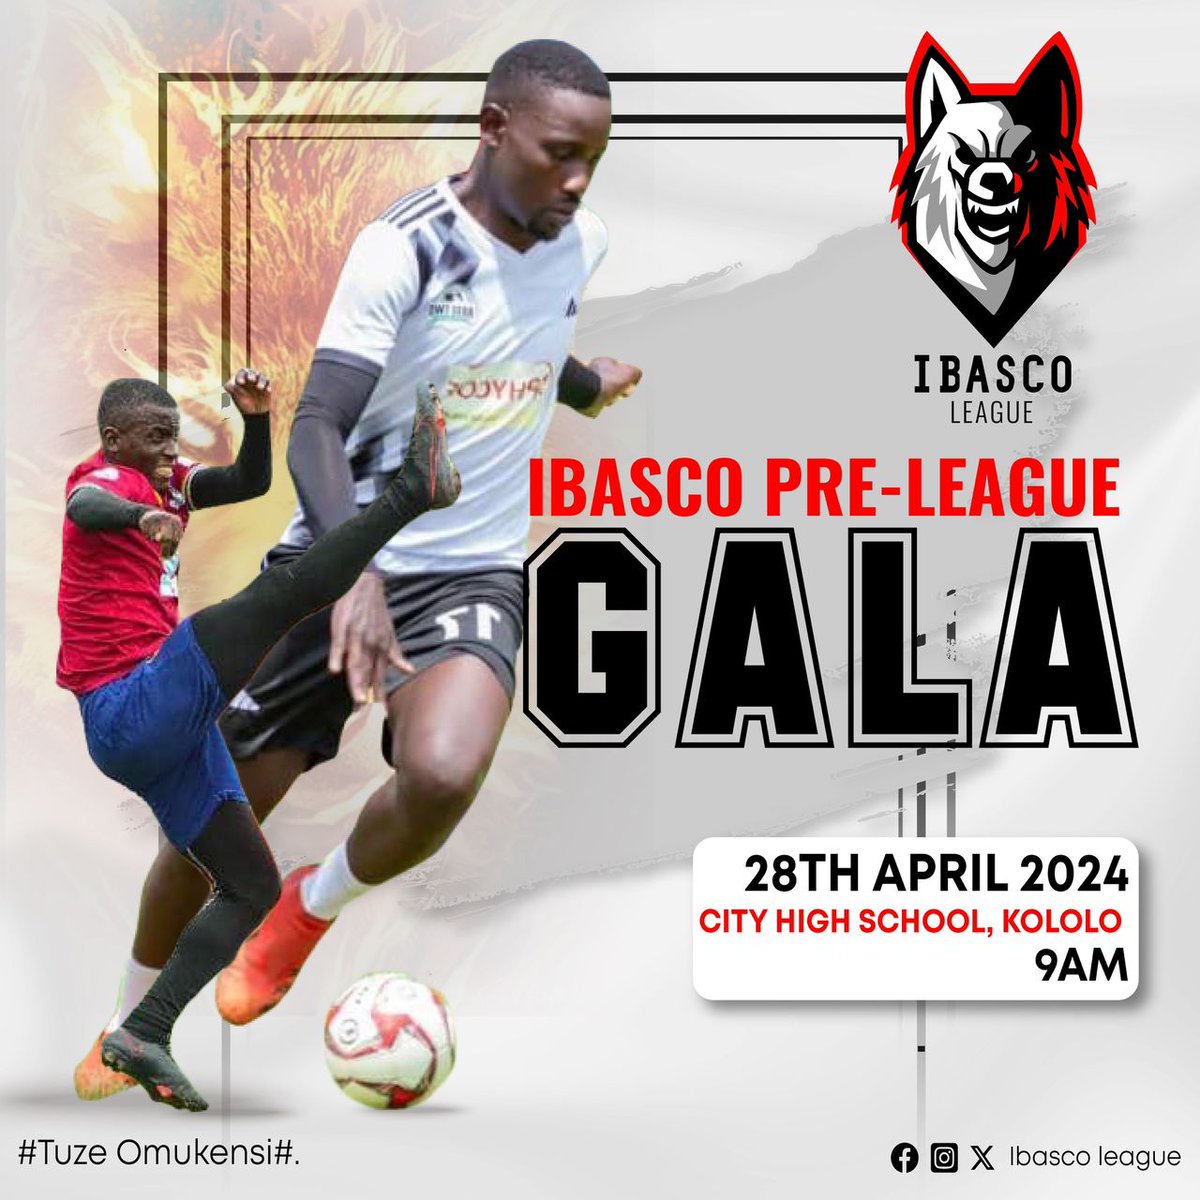 Calling all Ibasco Old Boys! 📣 Join us for the ultimate Pre-League Gala! It's a day filled with nostalgia, friendly competition, and cherished memories. Bring your families and friends Let's make this reunion one for the books! 🏆🎉 #IbascoOldBoys #PreLeagueGala #BringTheSquad